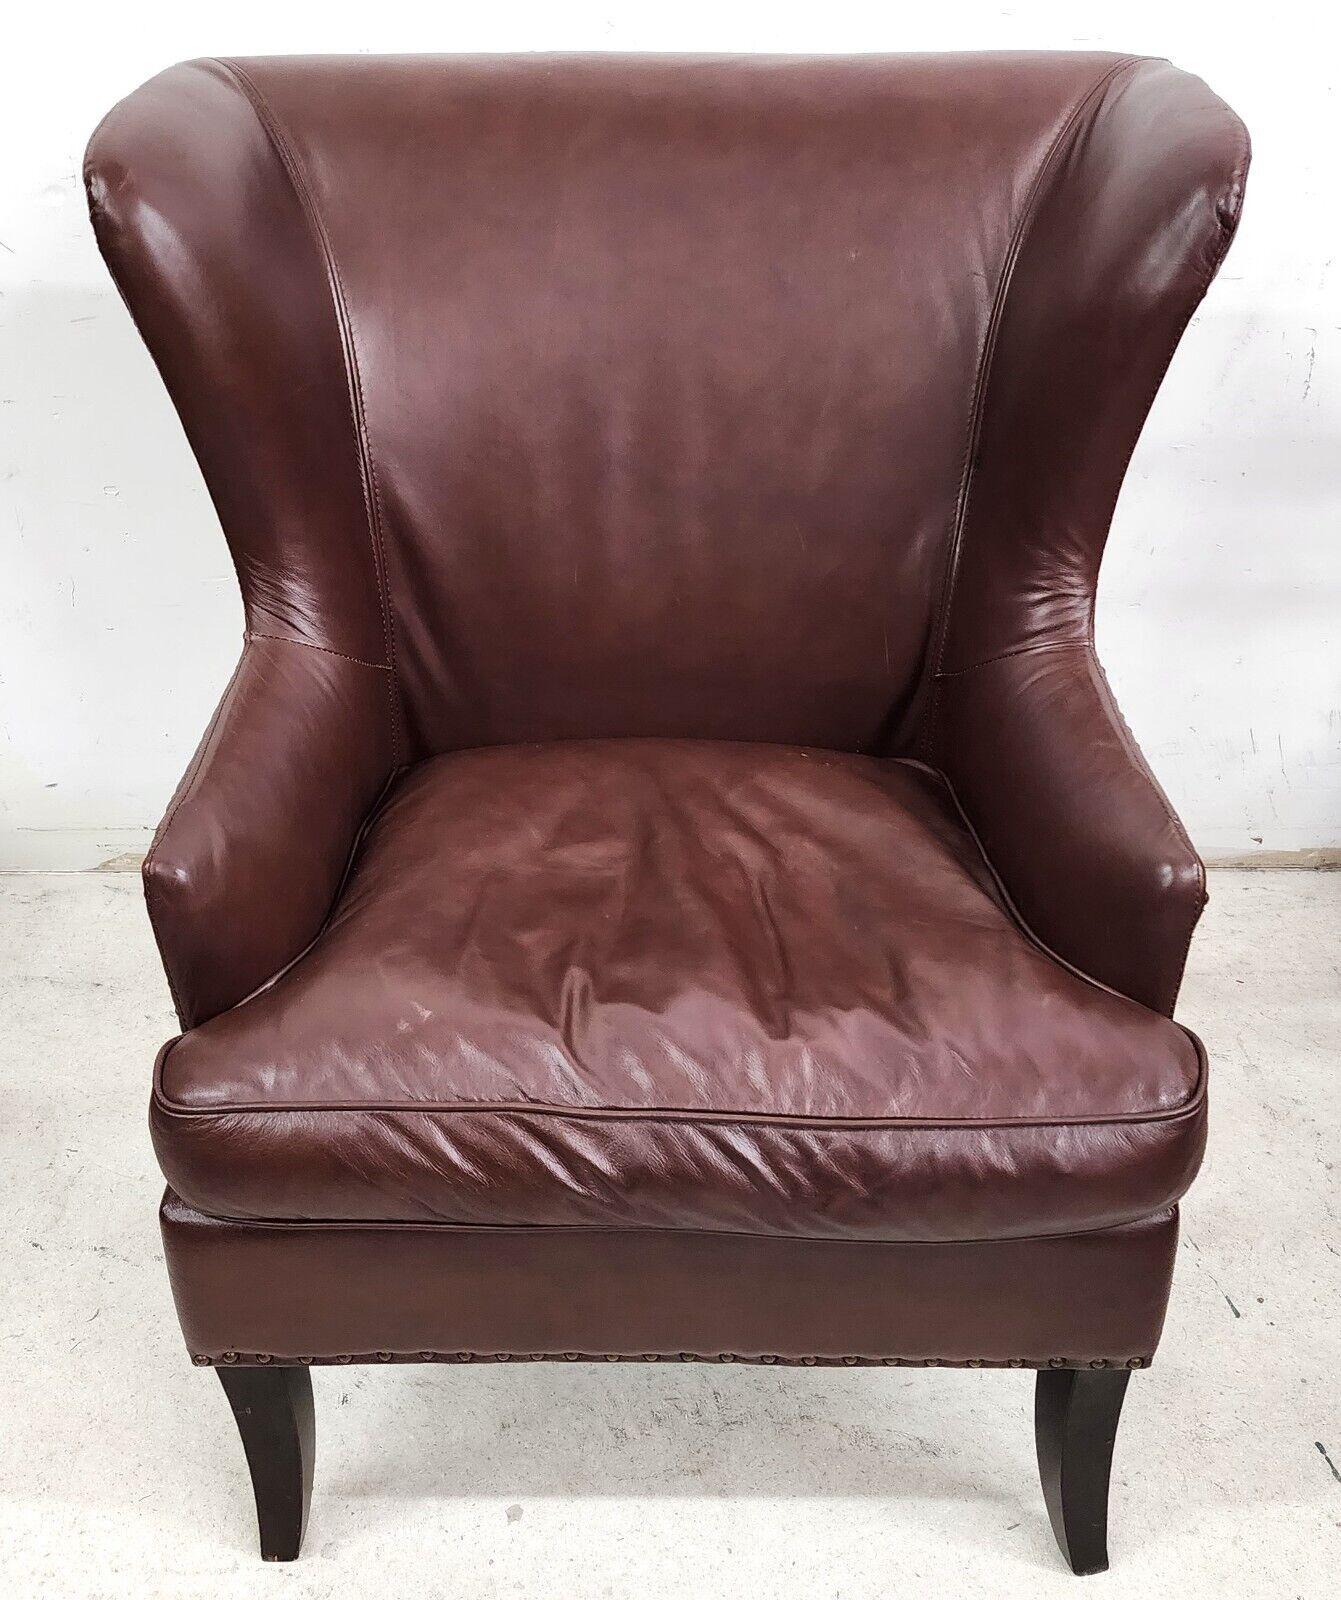 Offering one of our recent palm beach estate fine furniture acquisitions of an
Oversized real leather Wingback library reading armchair by DeCoro
Beautiful chair! Very comfortable.

Approximate measurements in inches
40.5